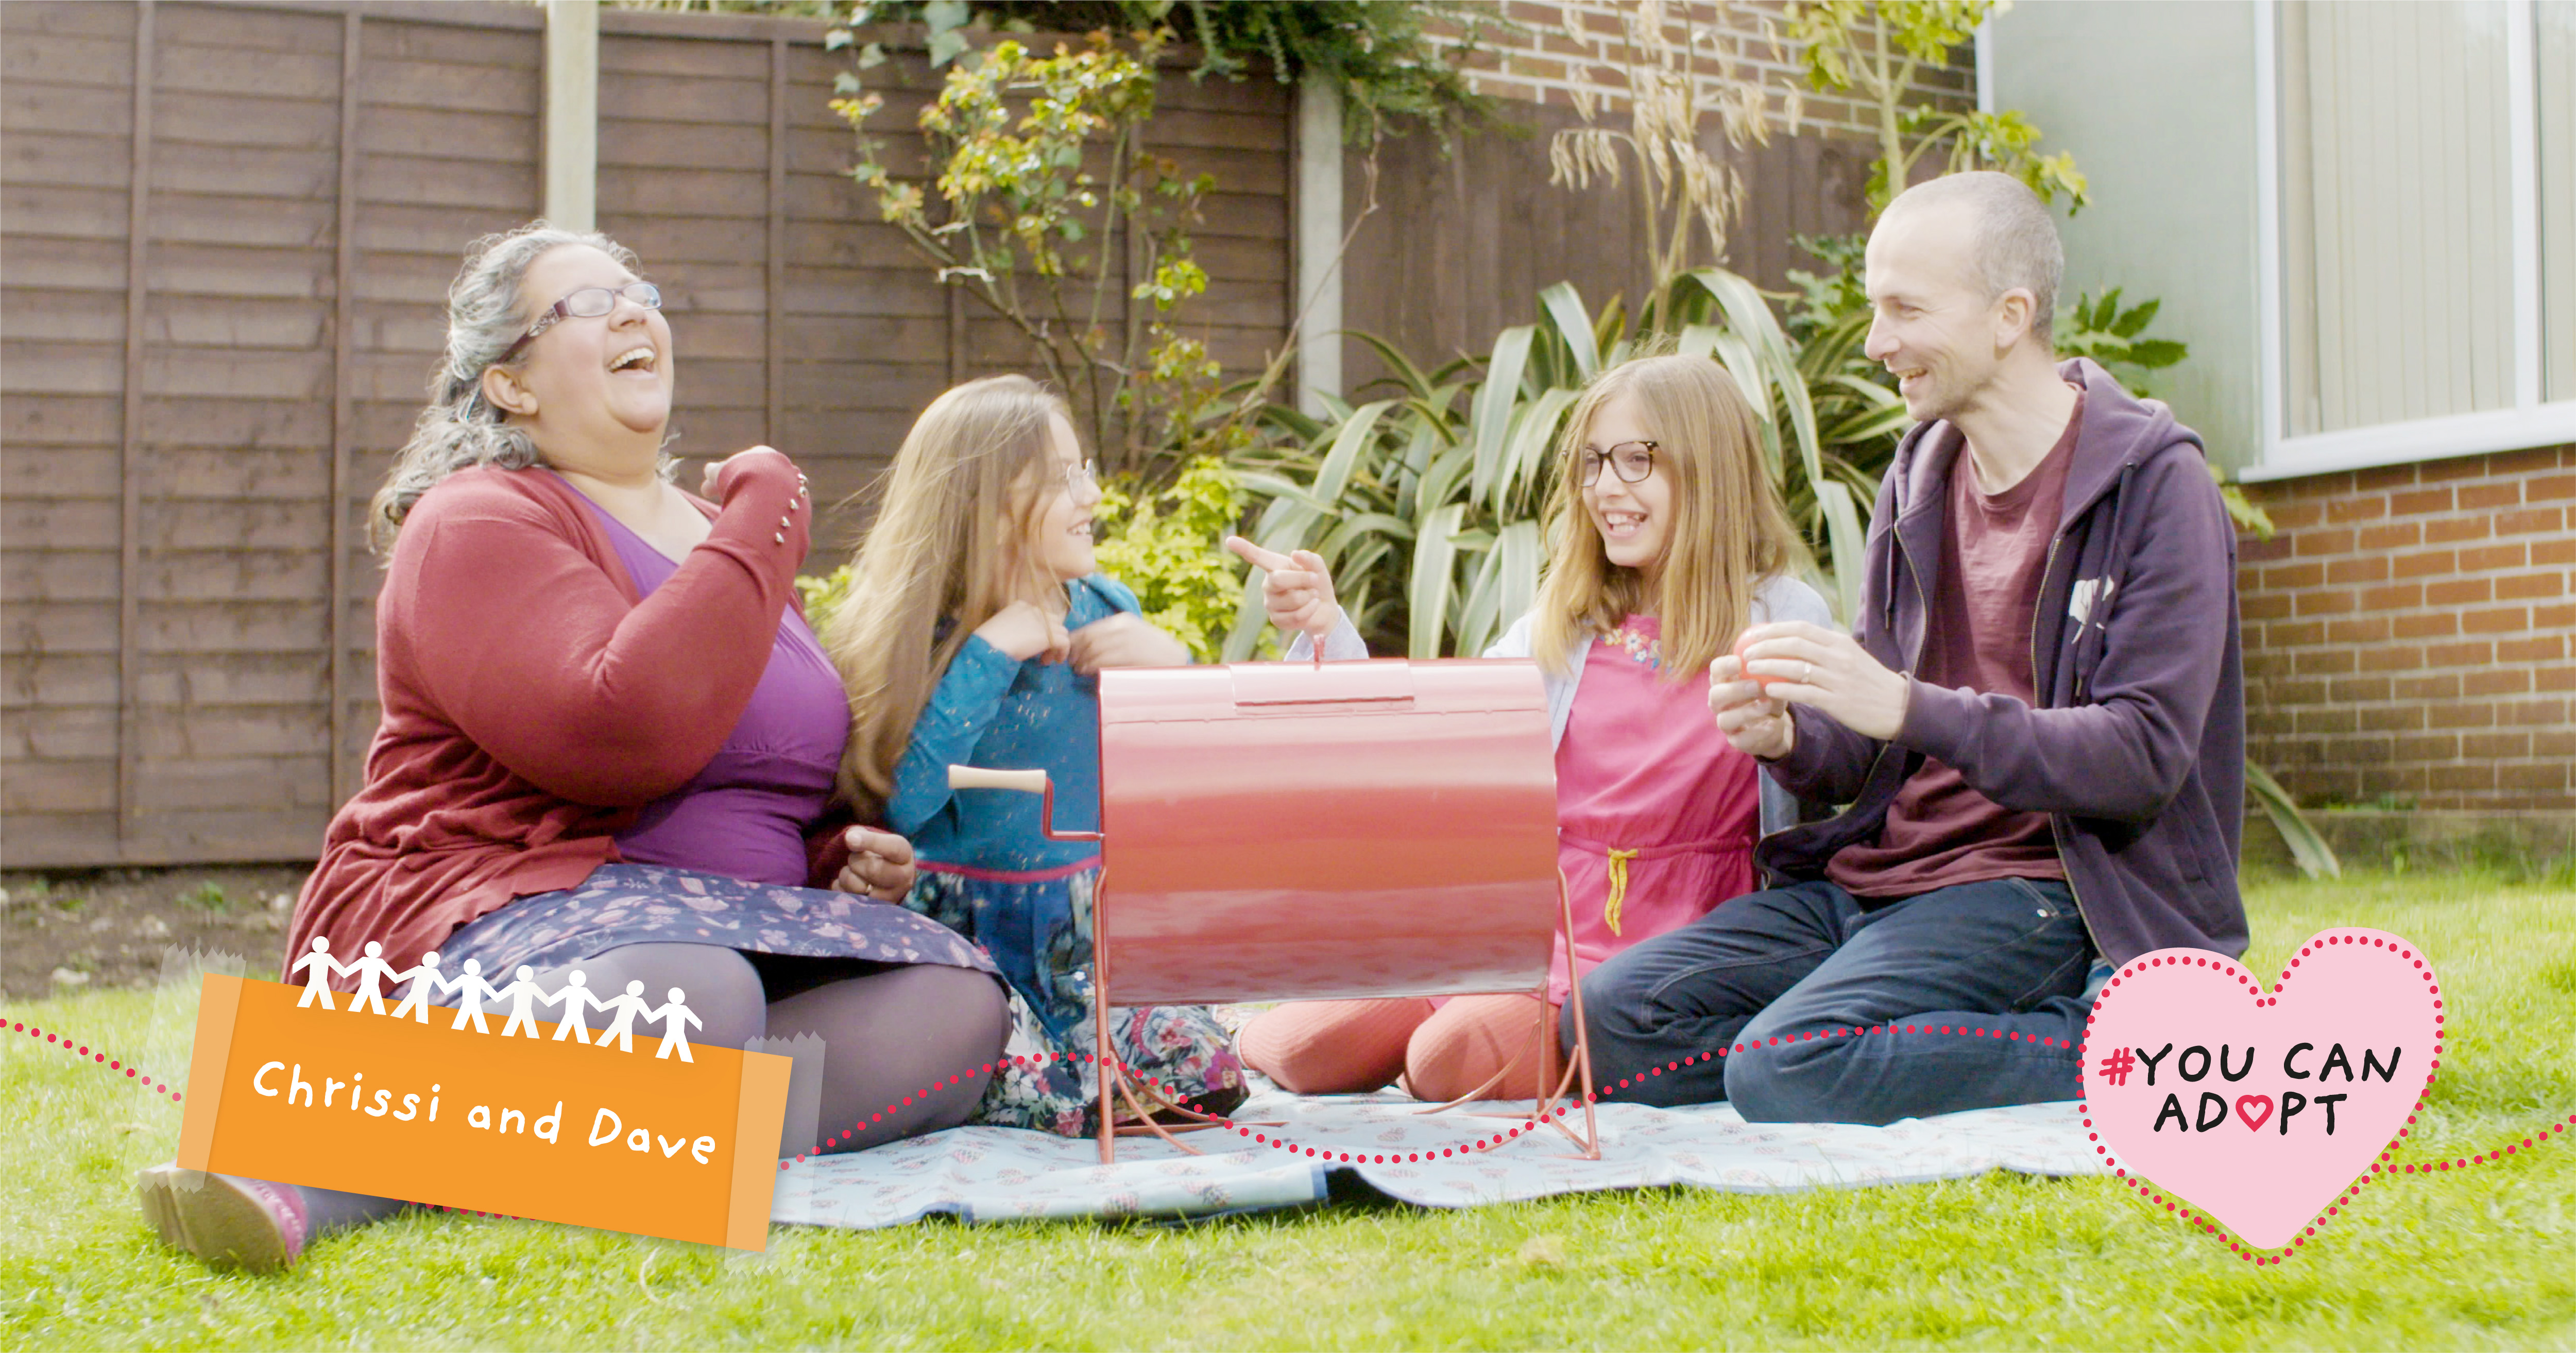 A mum, dad and their two daughters sit on a picnic blanket in their garden.